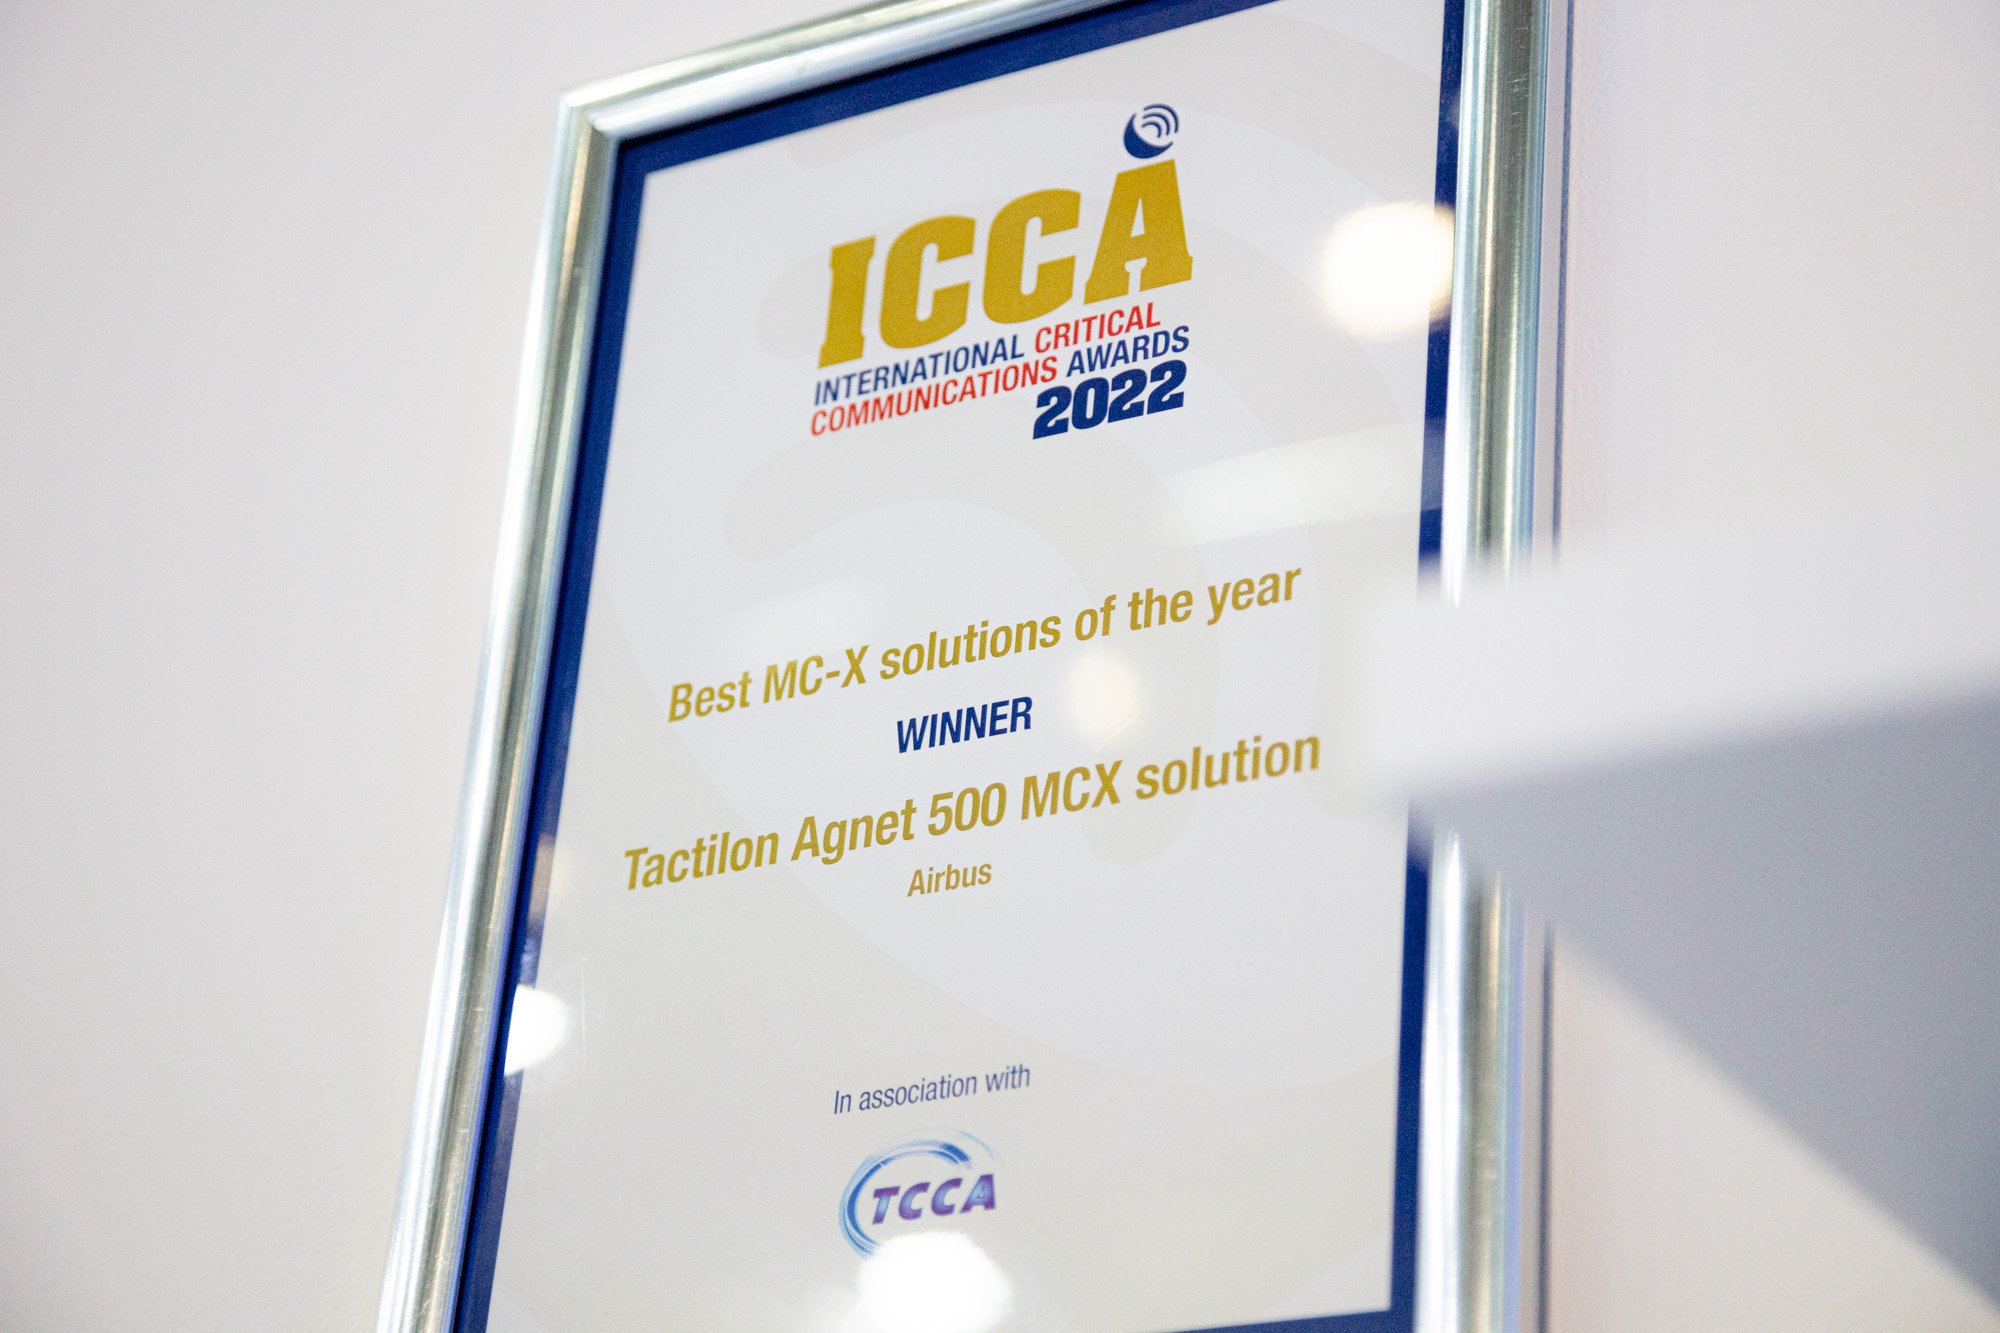 Airbus' Tactilon Agnet wins the 'Best MCX Solution of the Year